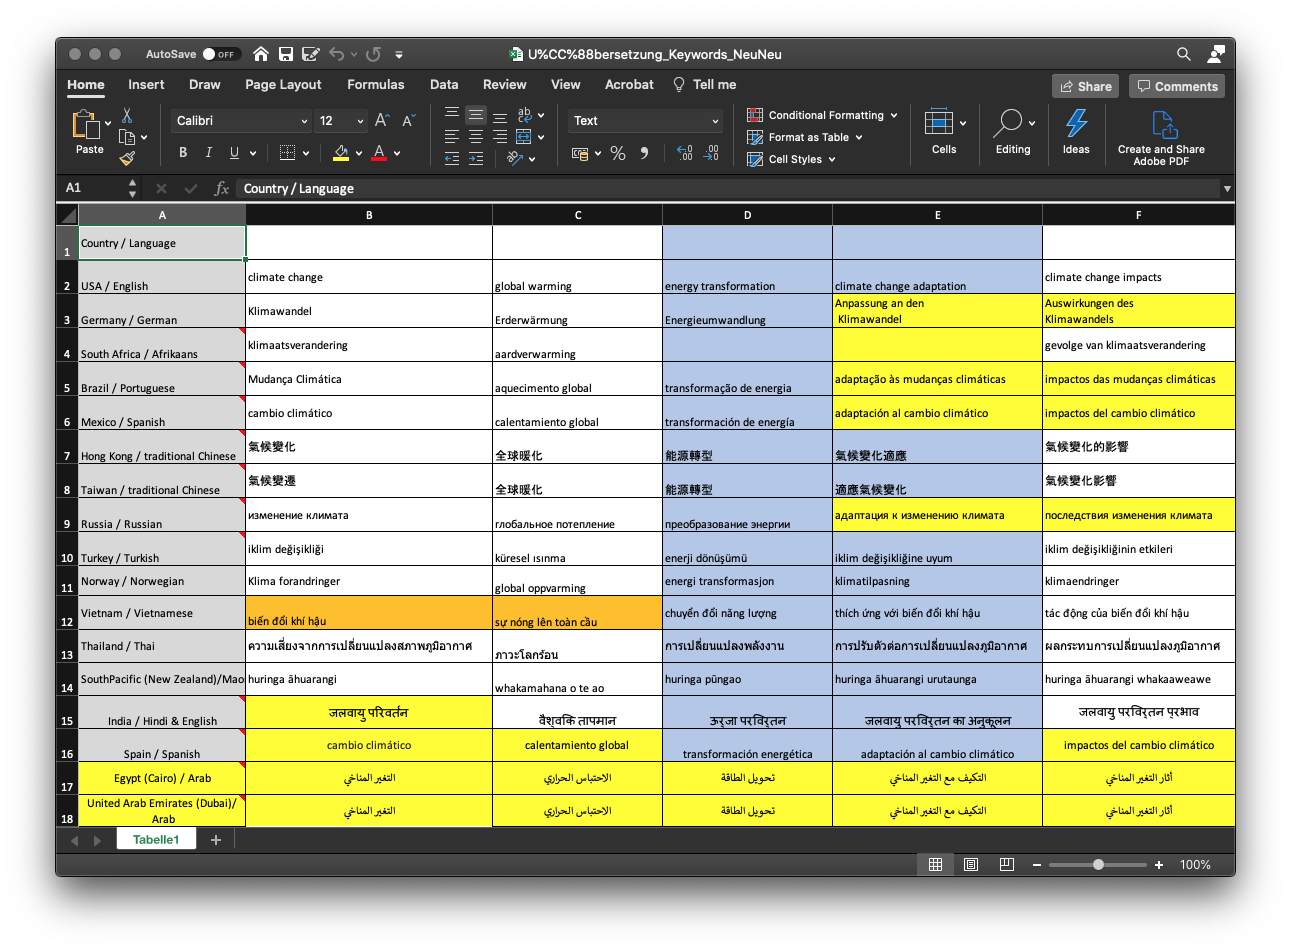 Image of a spreadsheet that is color coded using yelloew and blue